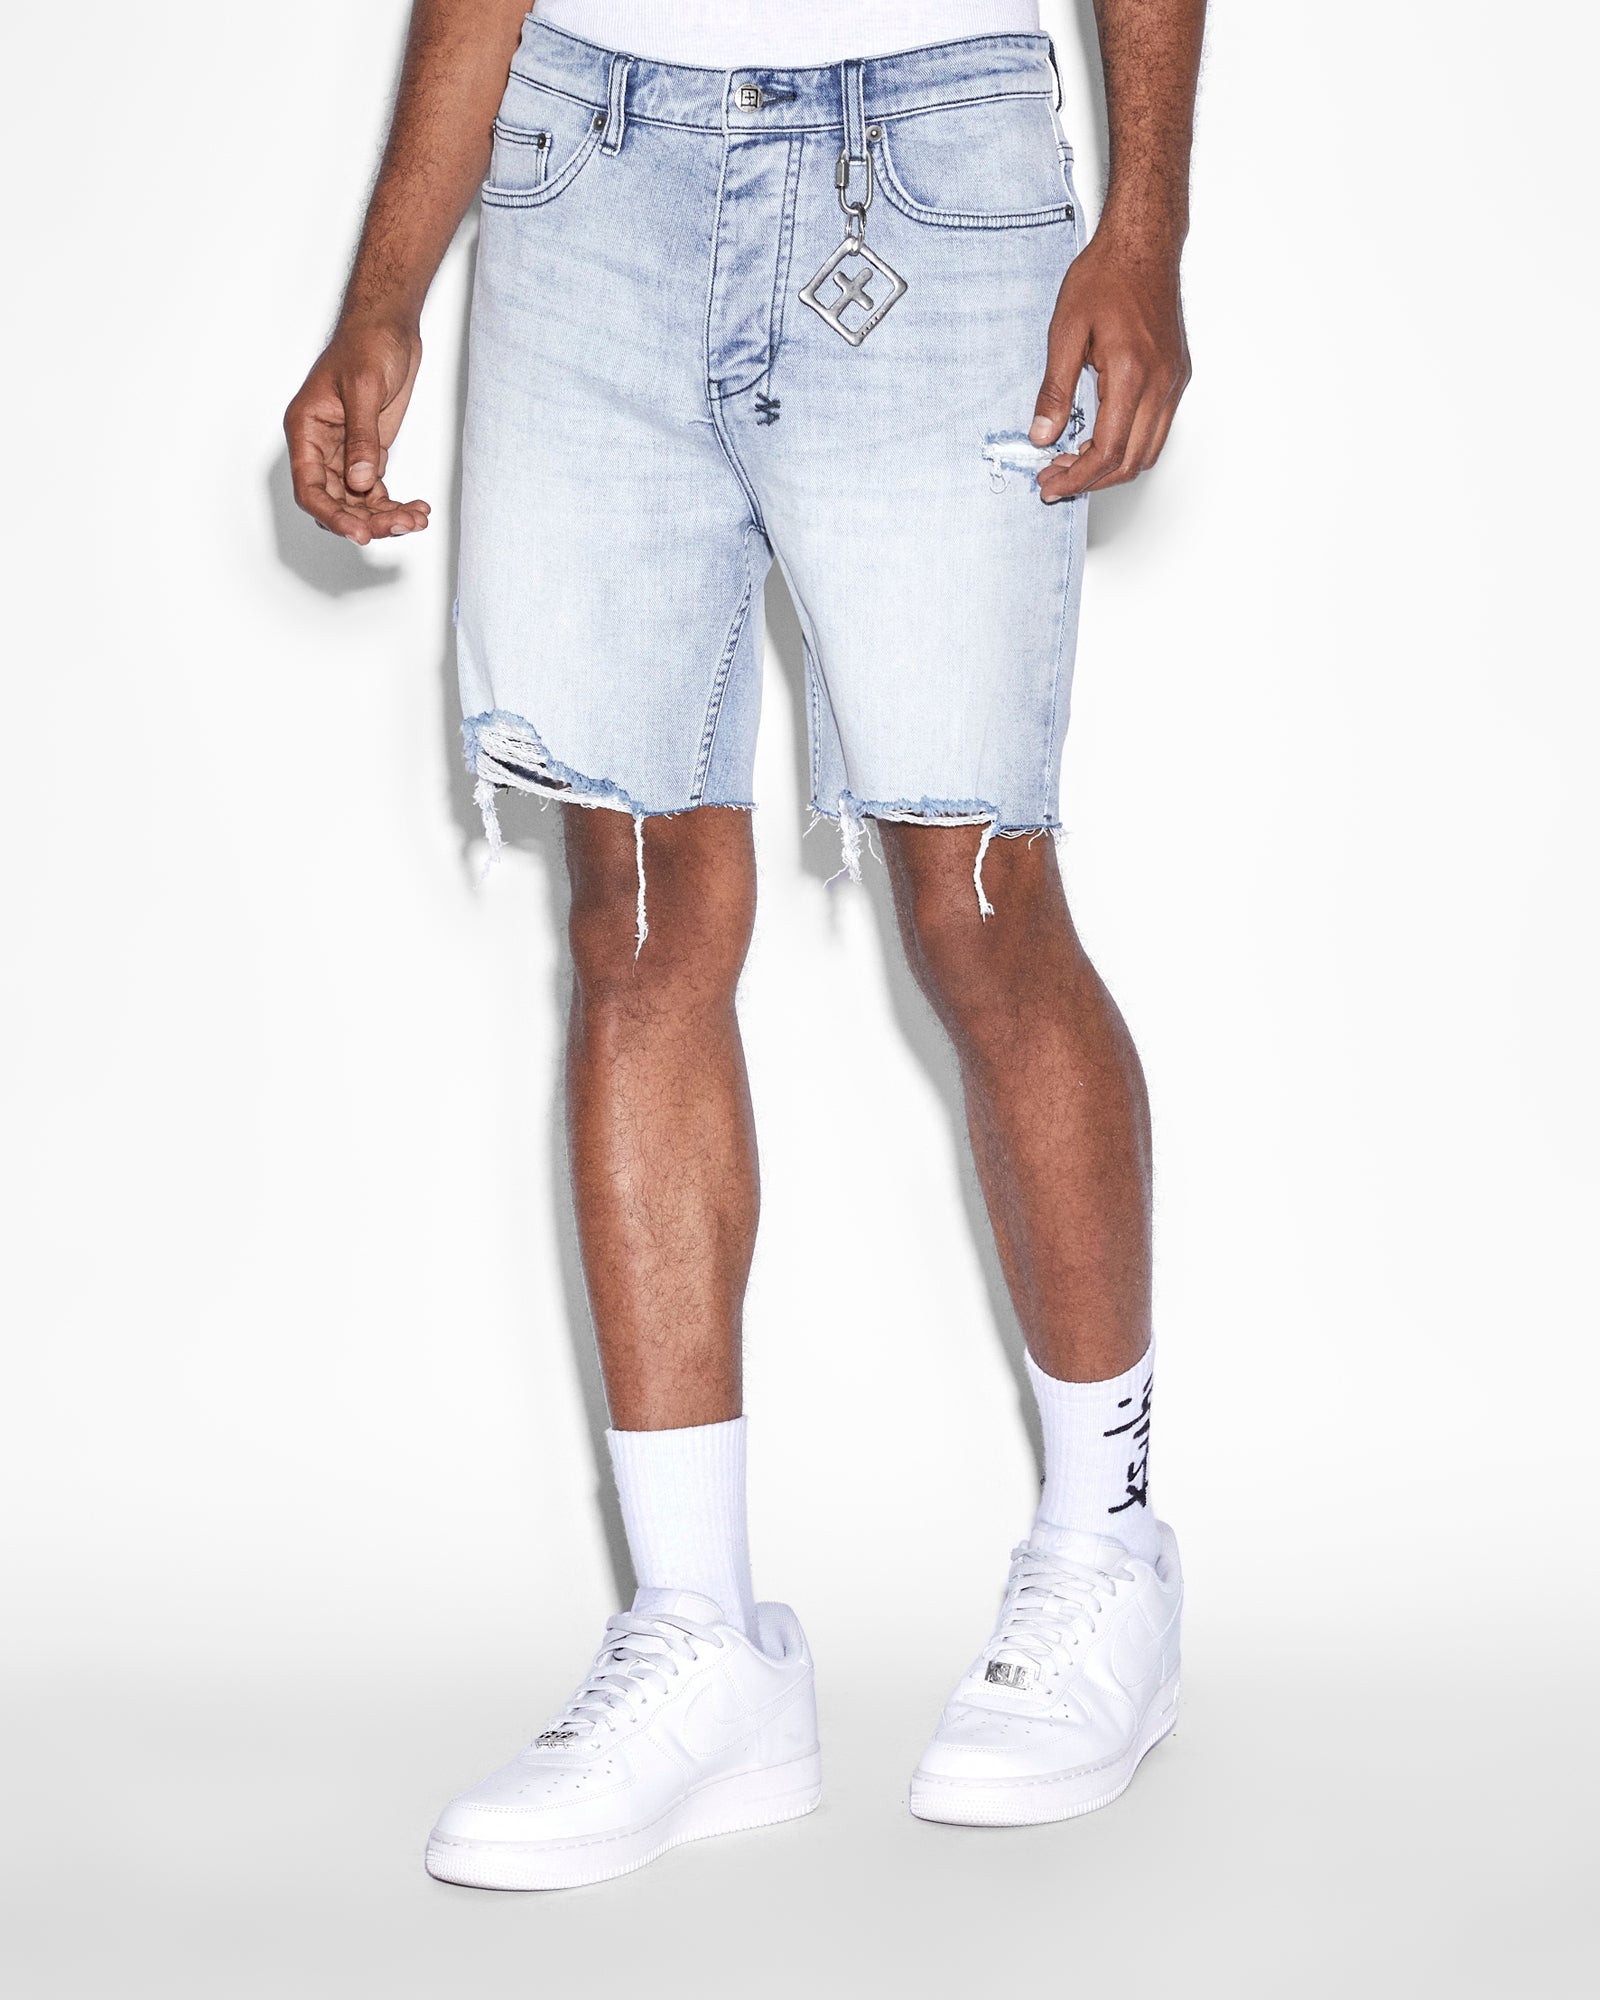 Ripped Raw Cut Denim Shorts for Sale New Zealand, New Collection Online